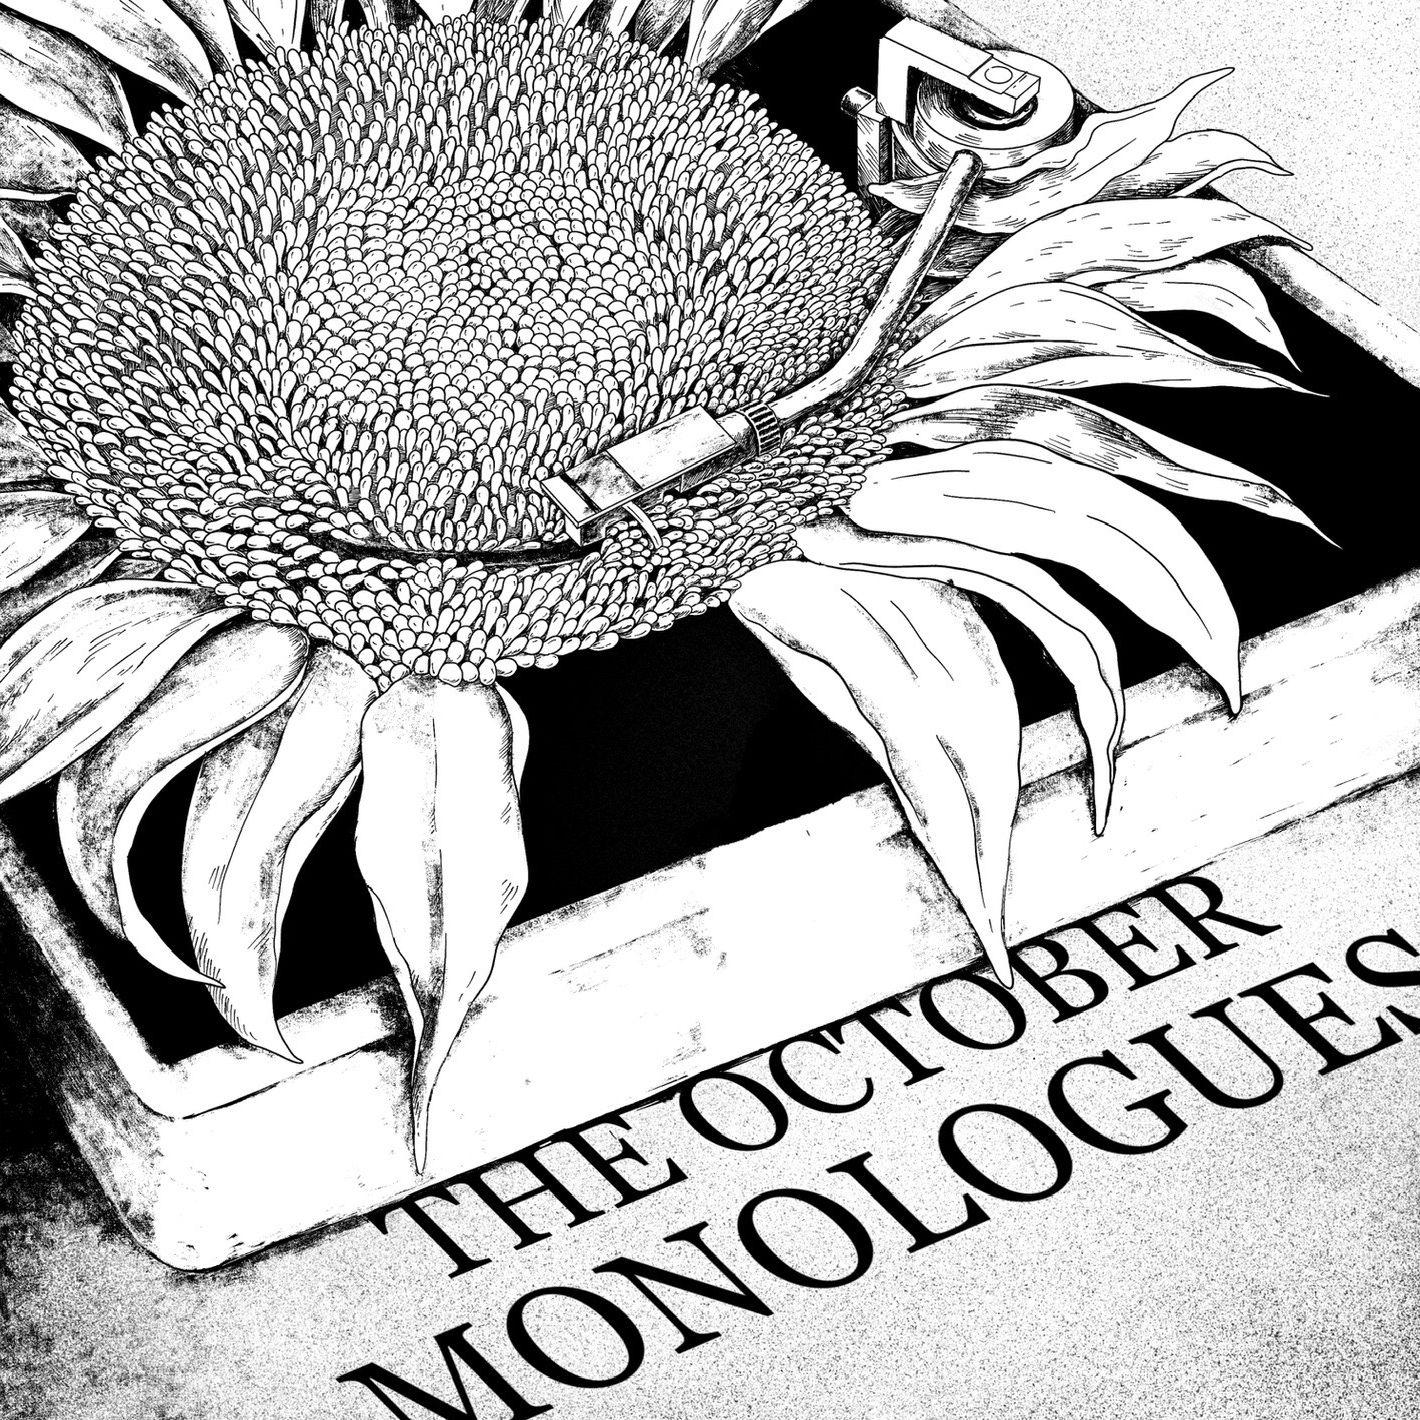 Thumbnail for "175 - The October Monologues".